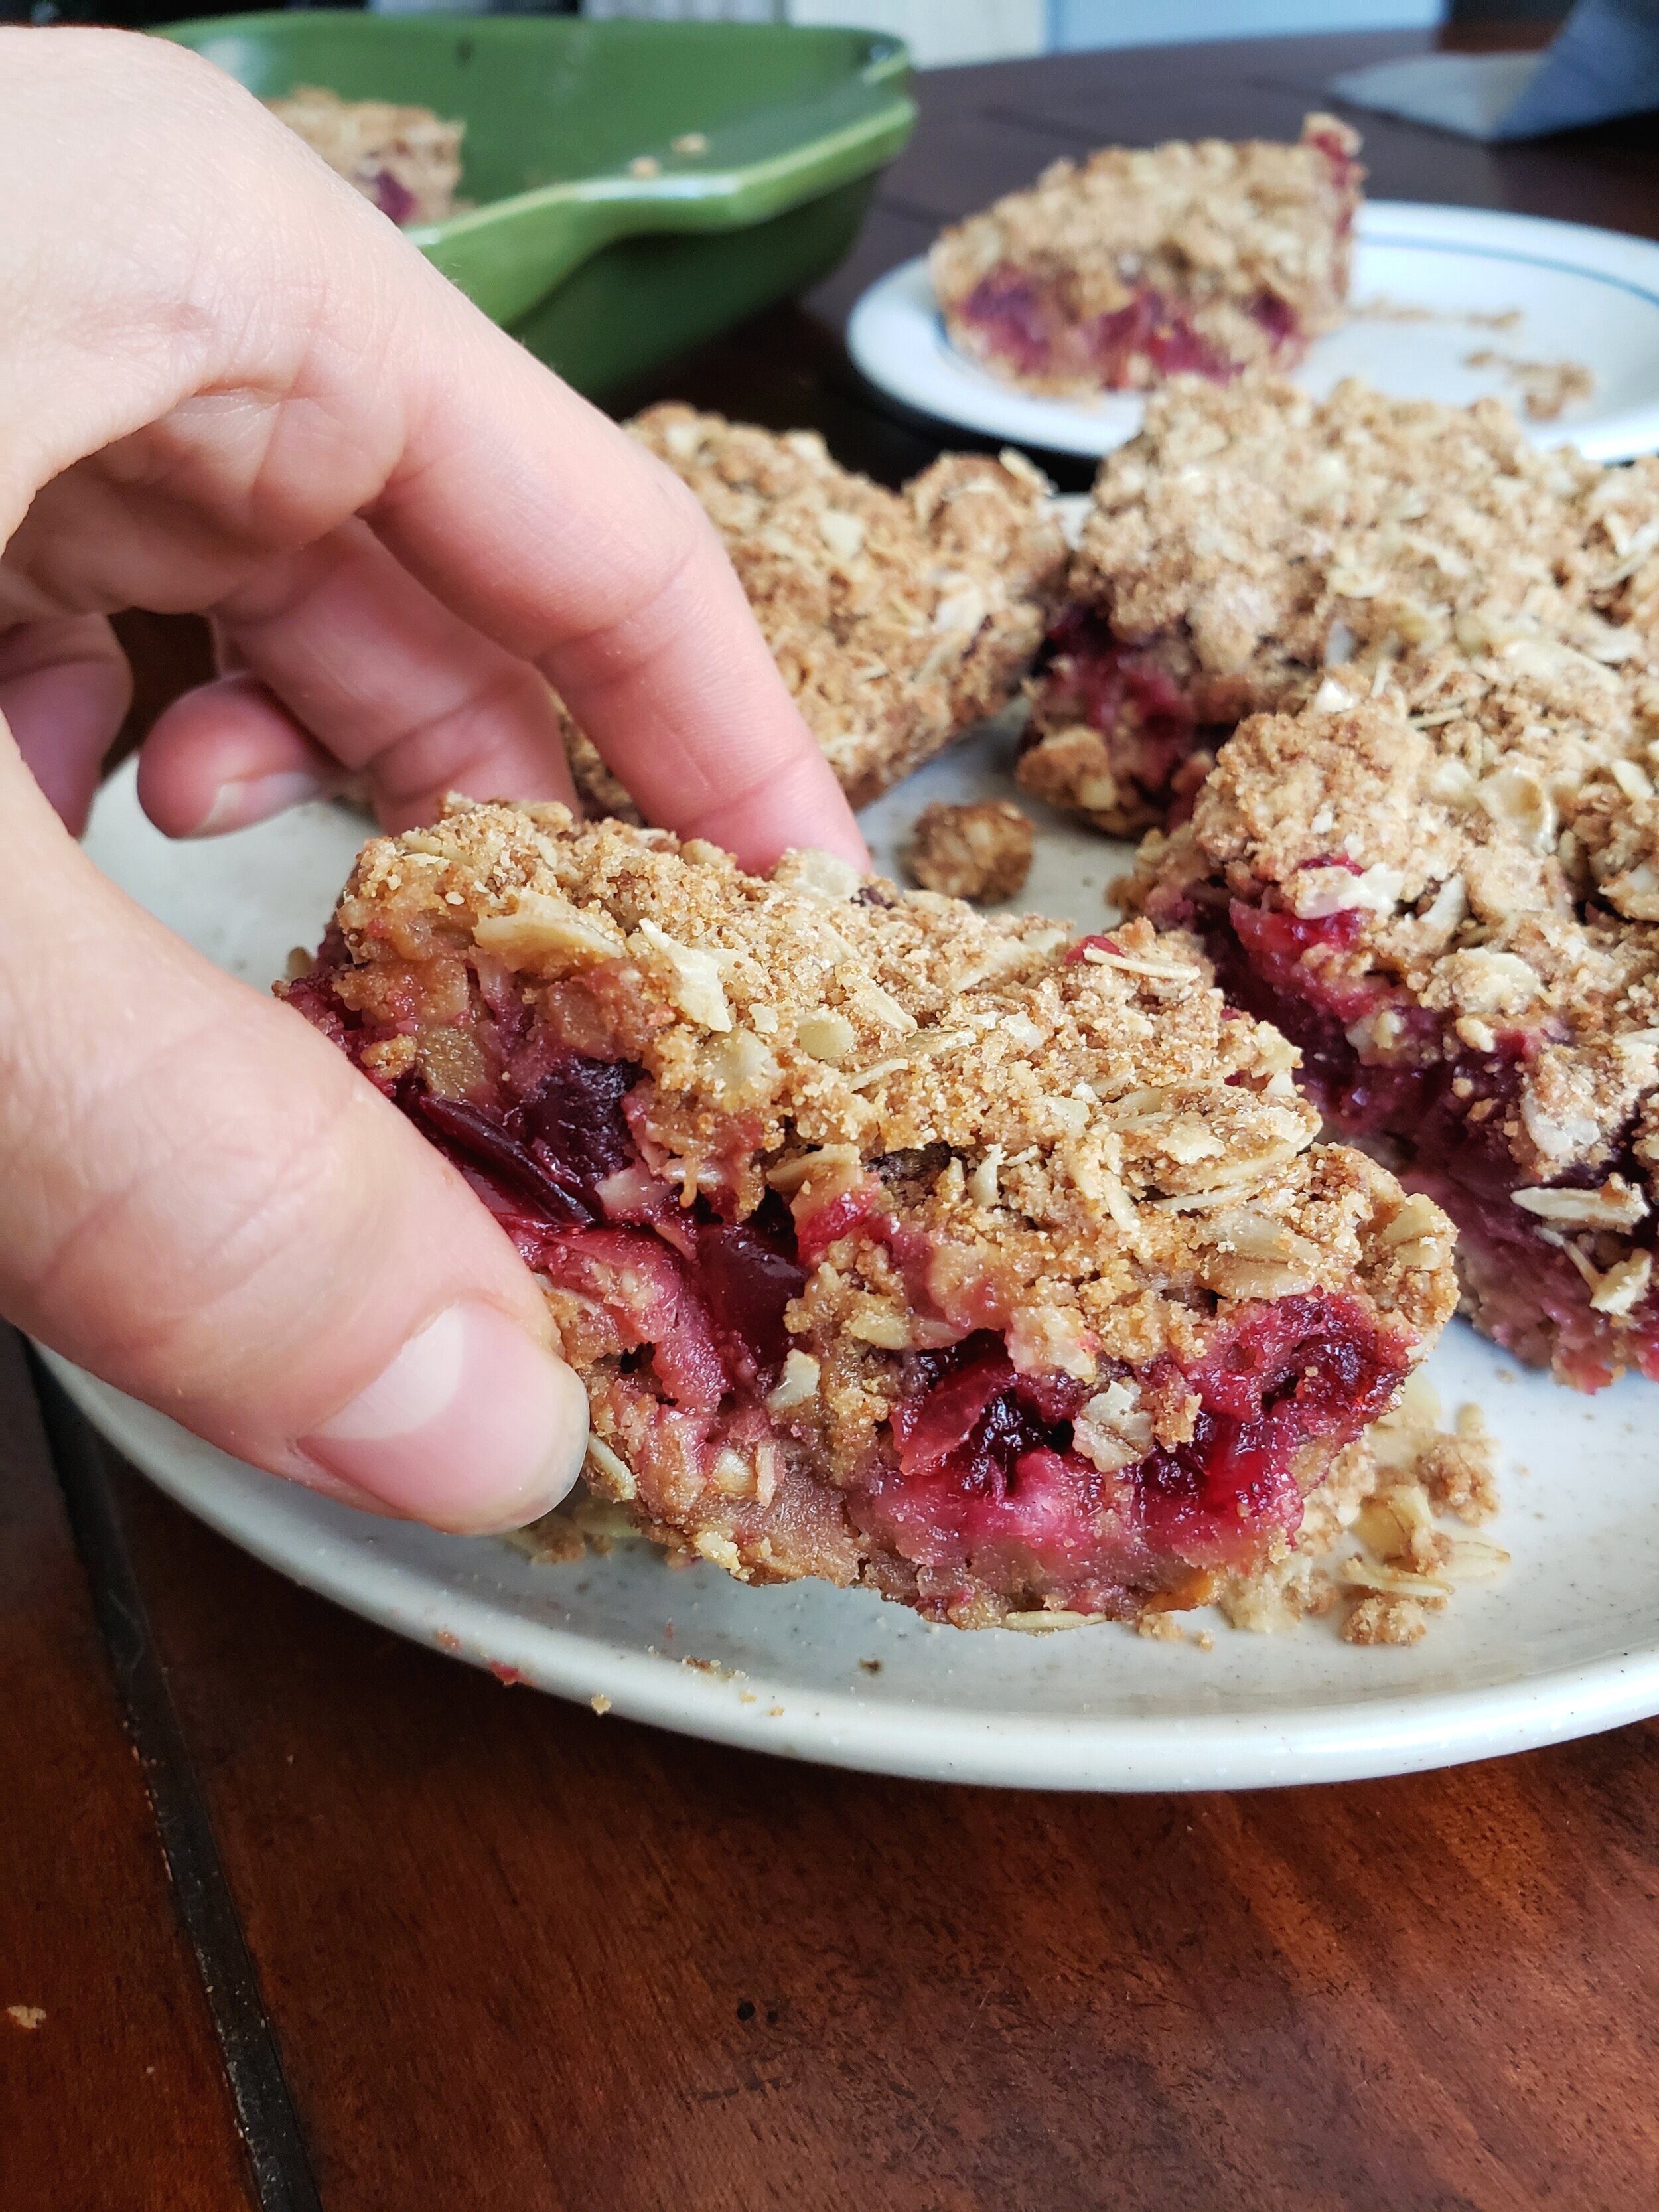  Tart, sweet and full of texture. These Cranberry Oat Bars will please the whole family. 